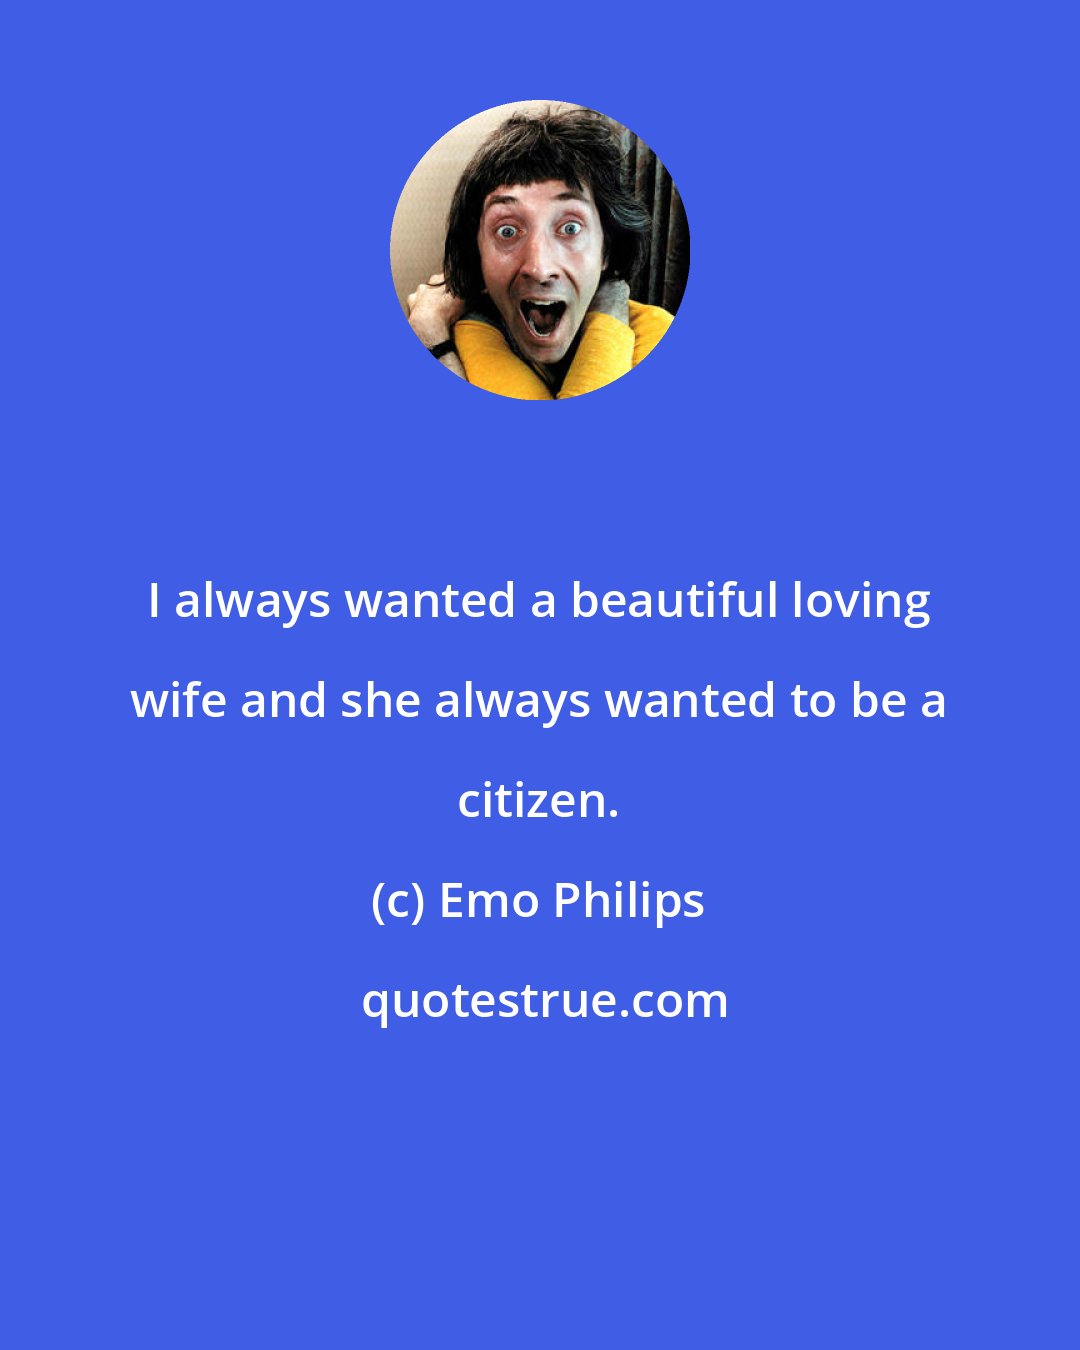 Emo Philips: I always wanted a beautiful loving wife and she always wanted to be a citizen.